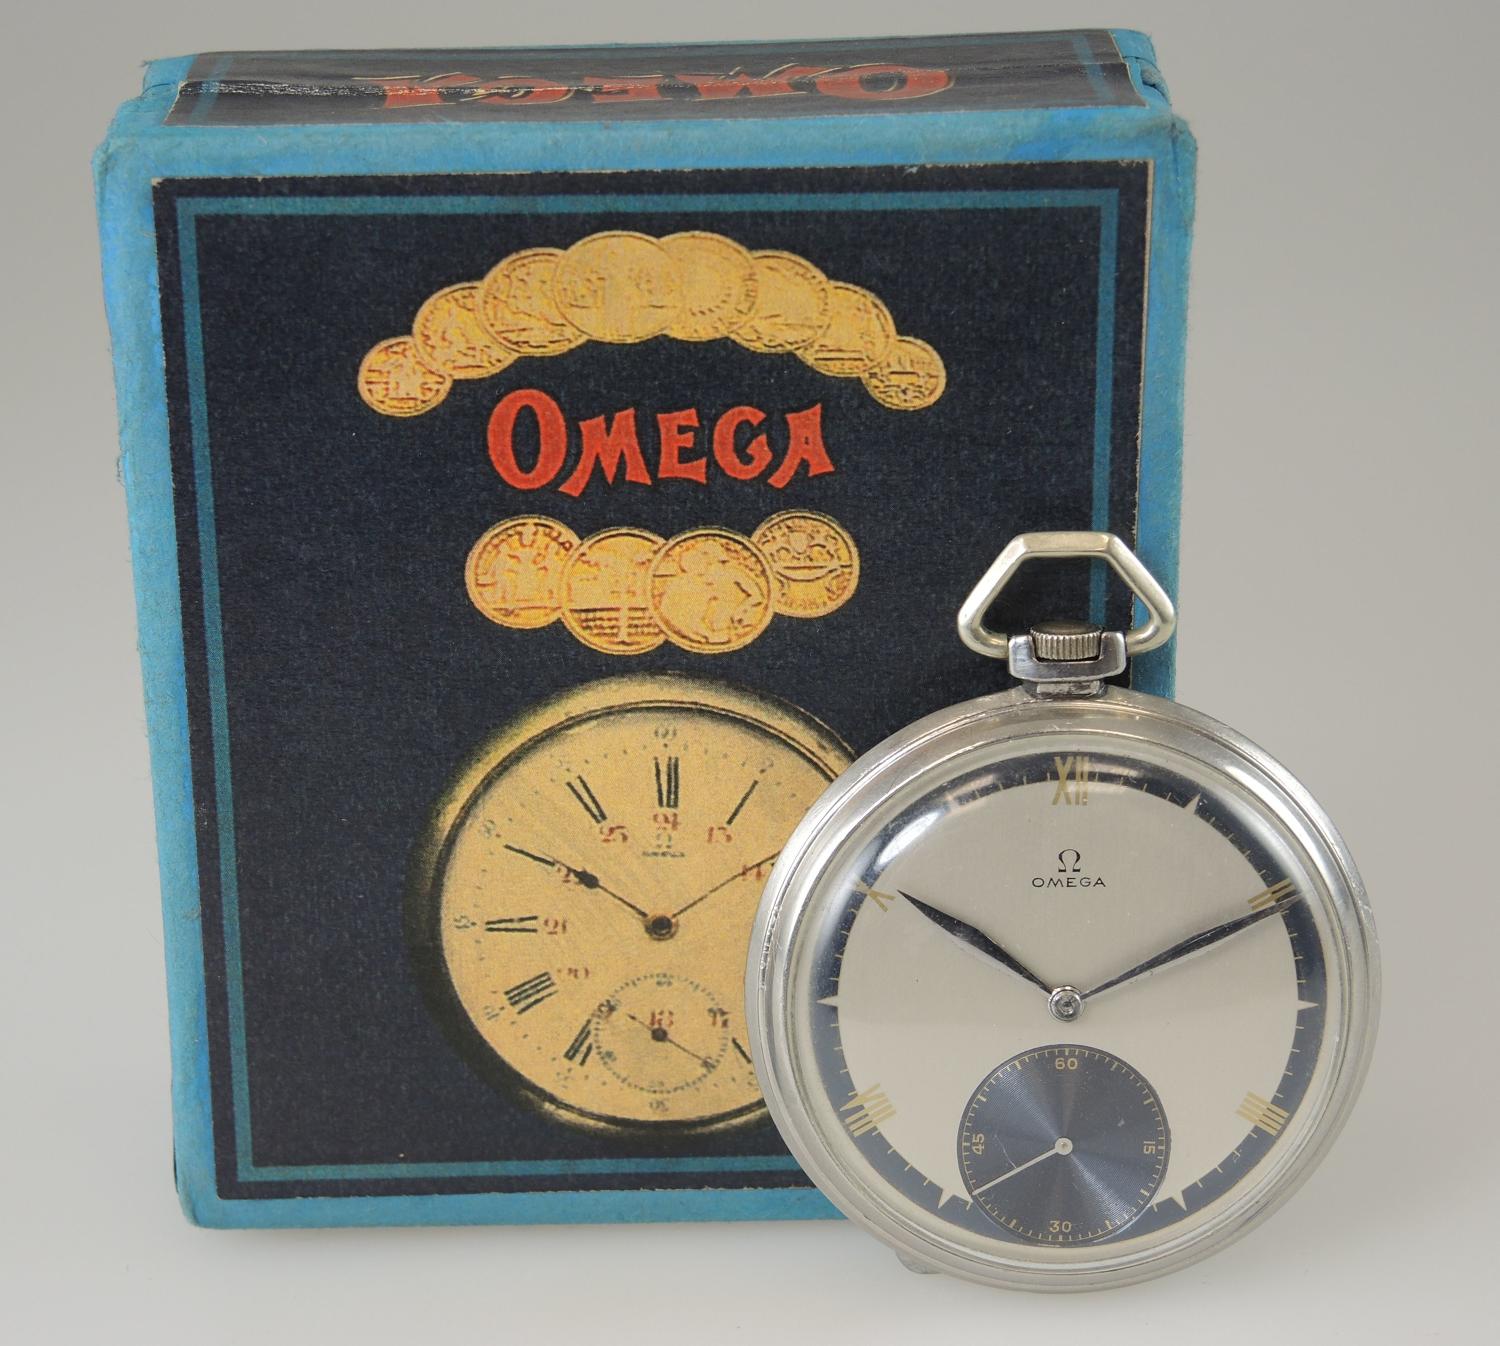 Vintage Omega pocket watch with a Two Tone dial and Box c1929